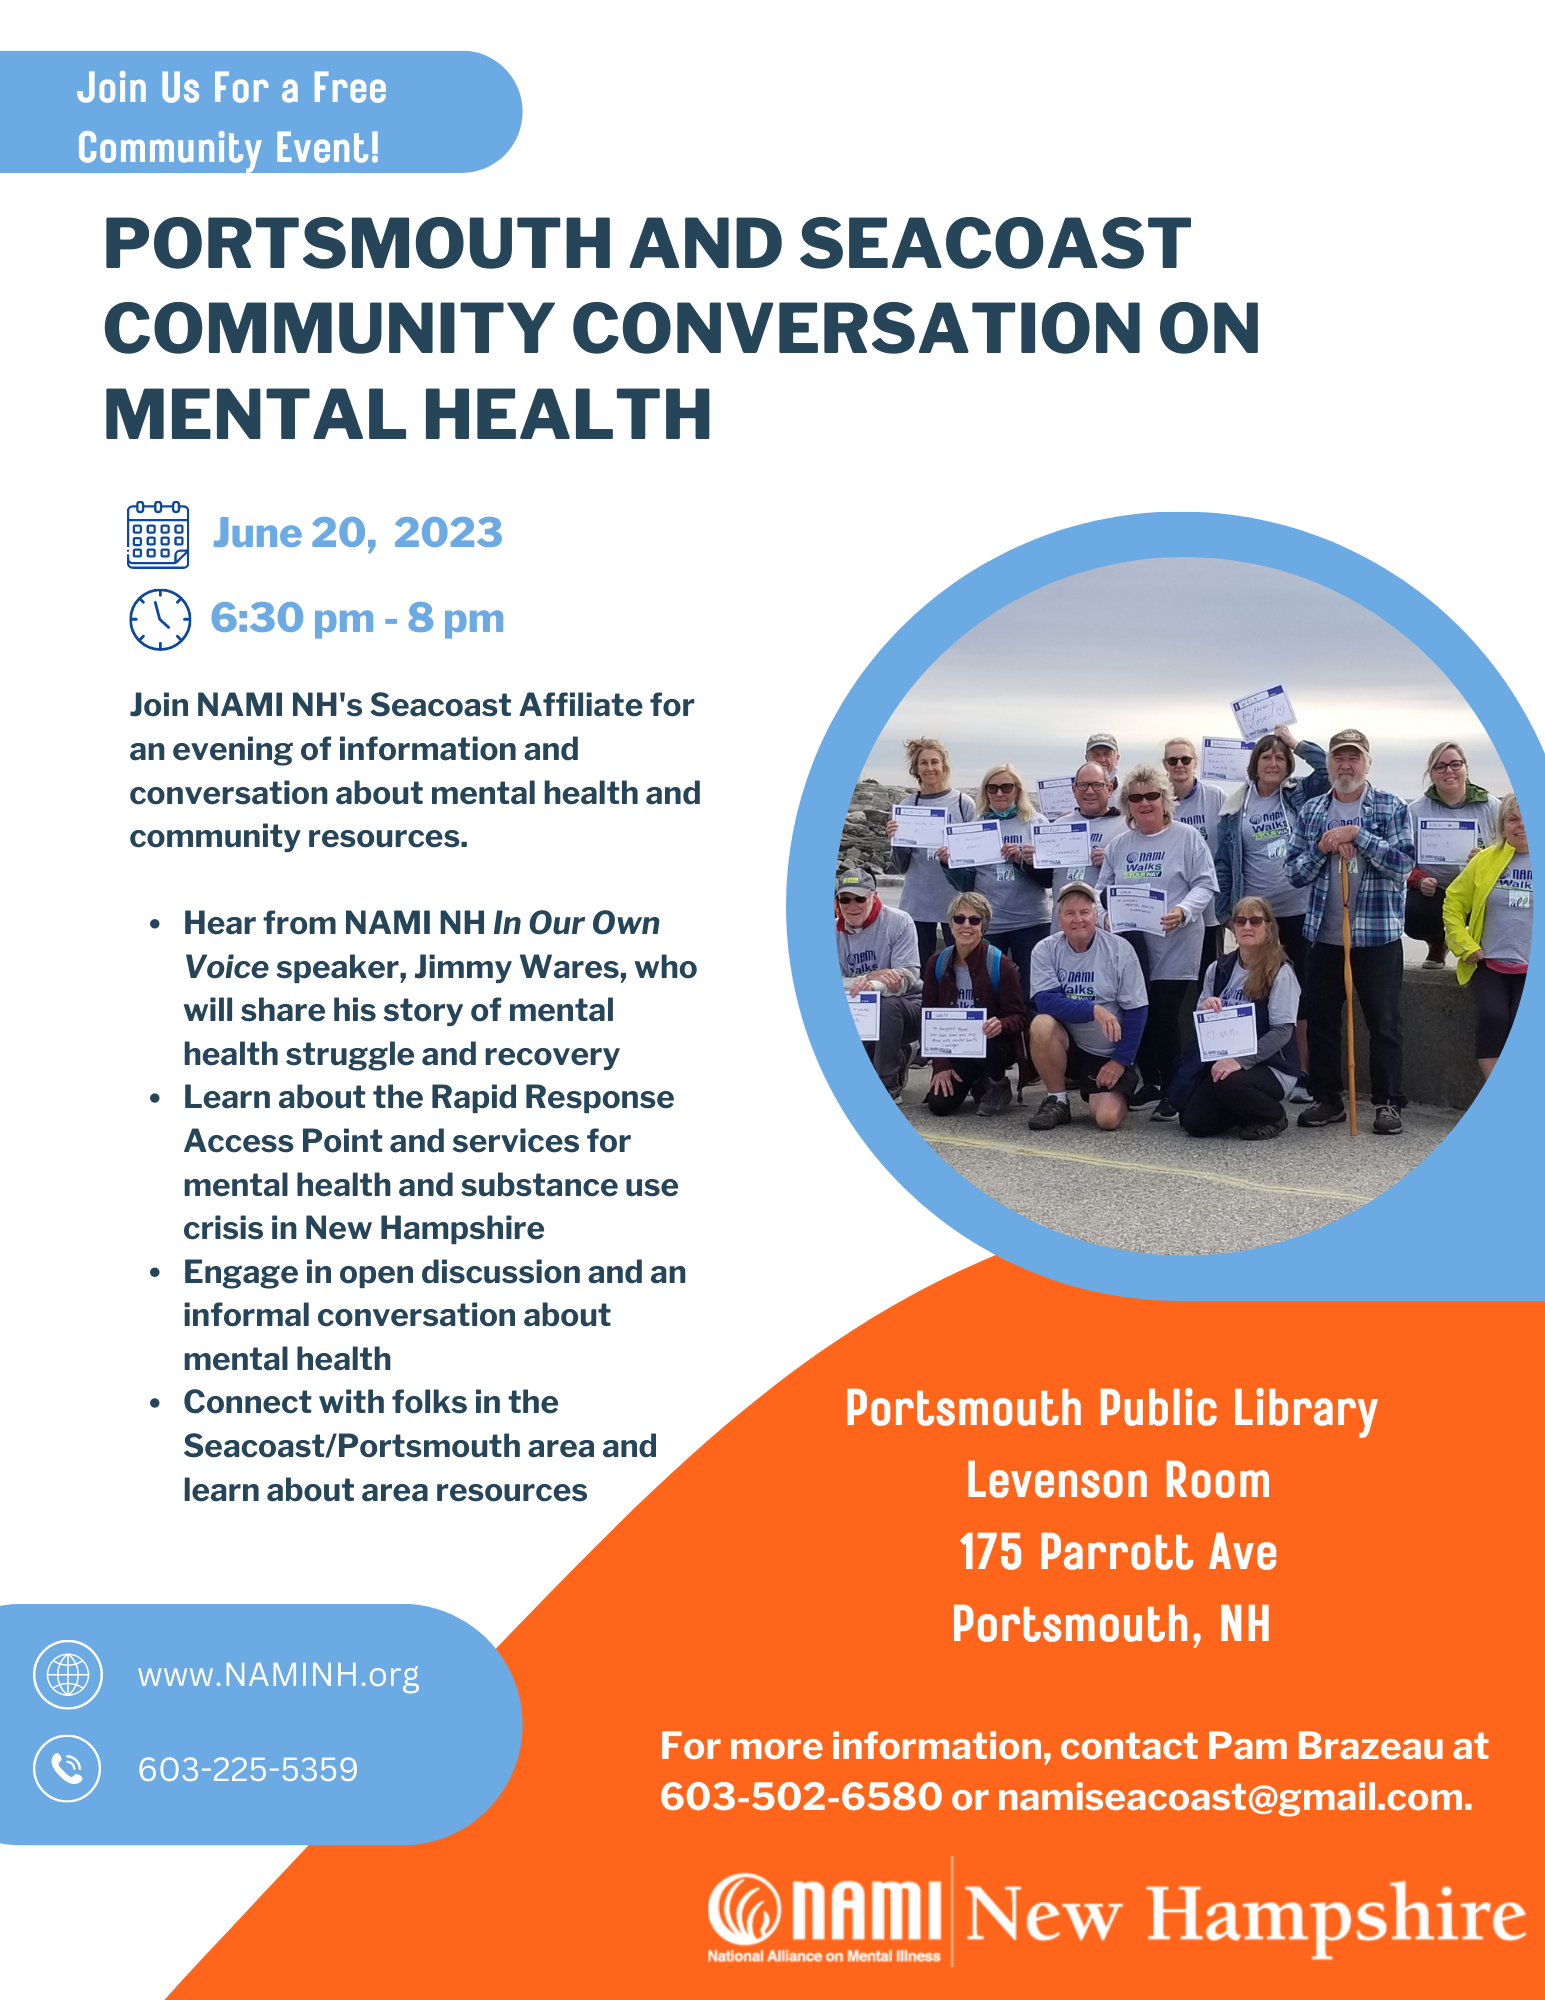 Portsmouth and Seacoast Community Conversation on Mental Health